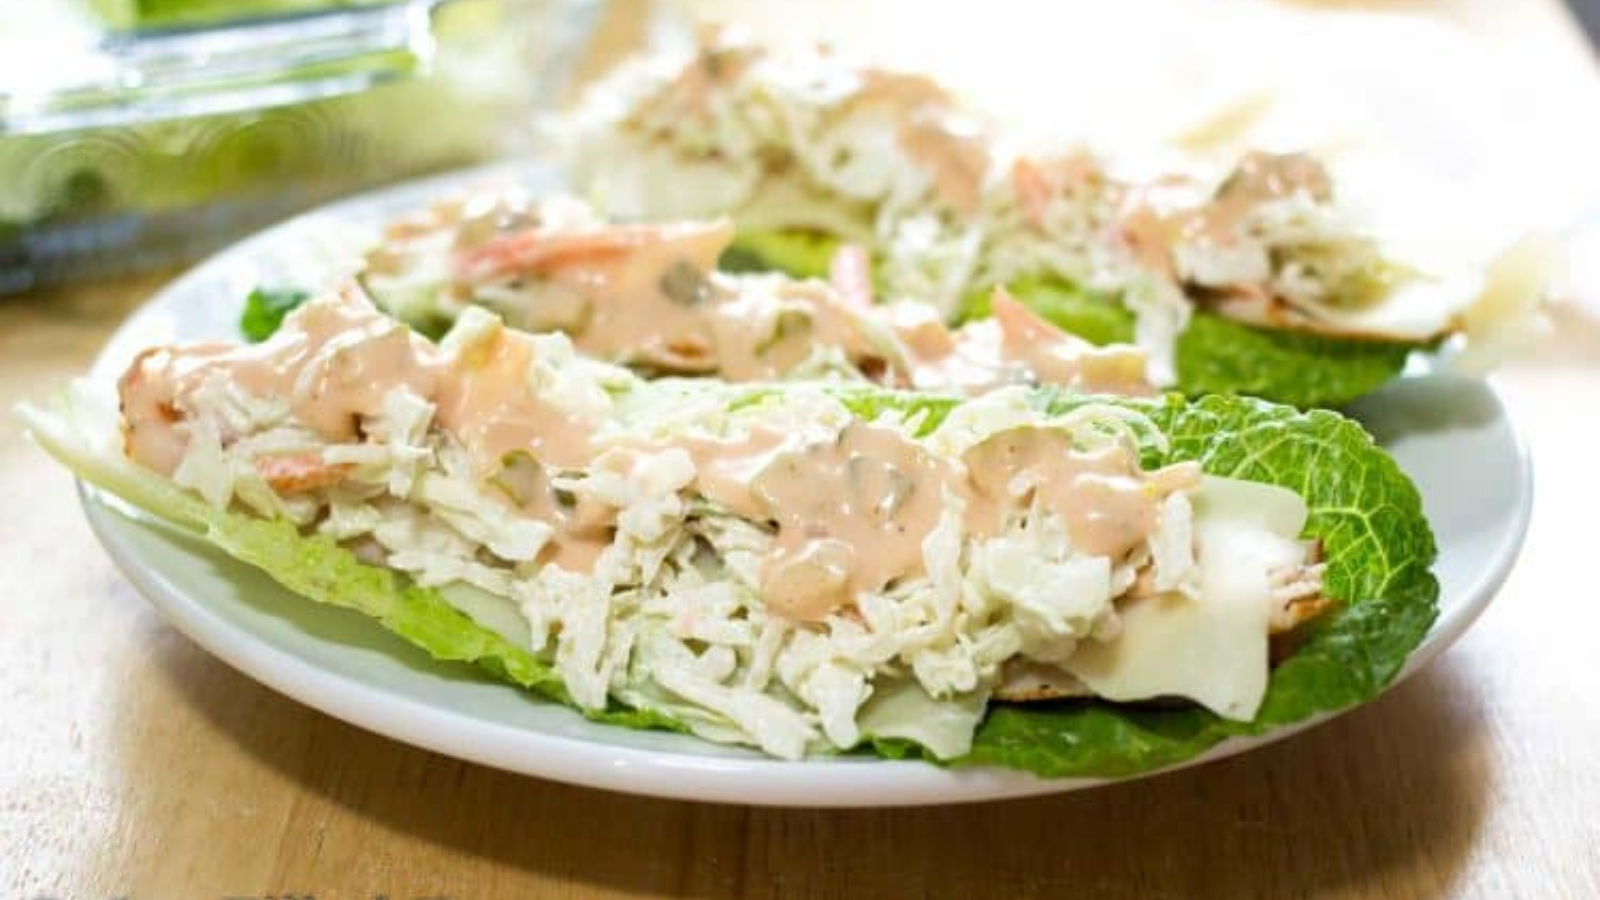 Lettuce cups filled with turkey, cheese and thousand island dressing.